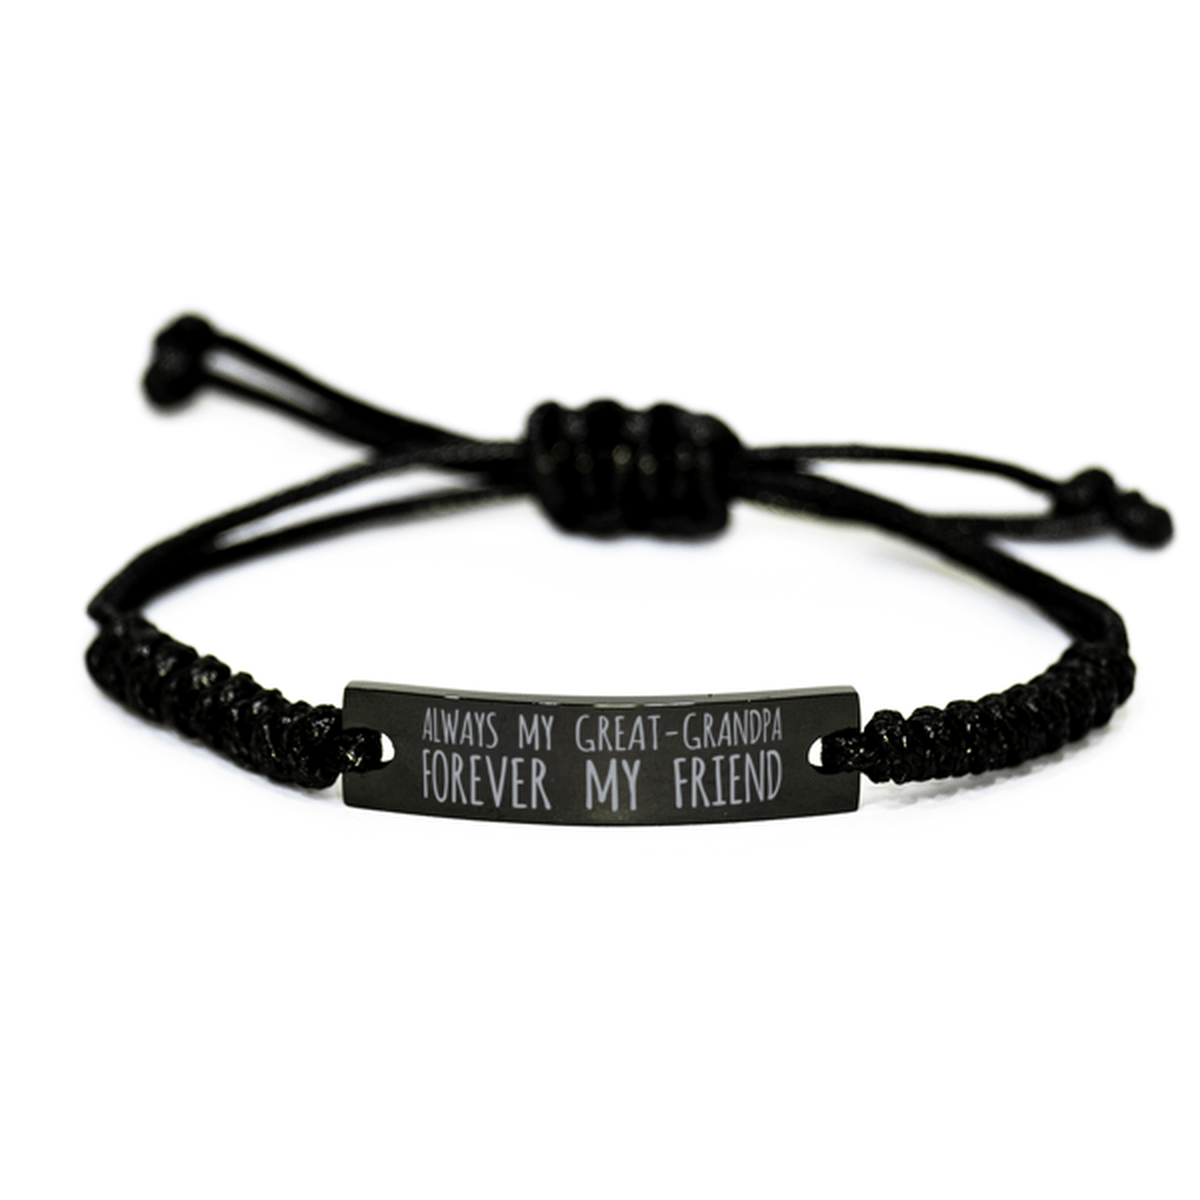 Inspirational Great Grandpa1 Black Rope Bracelet, Always My Great Grandpa1 Forever My Friend, Best Birthday Gifts For Family